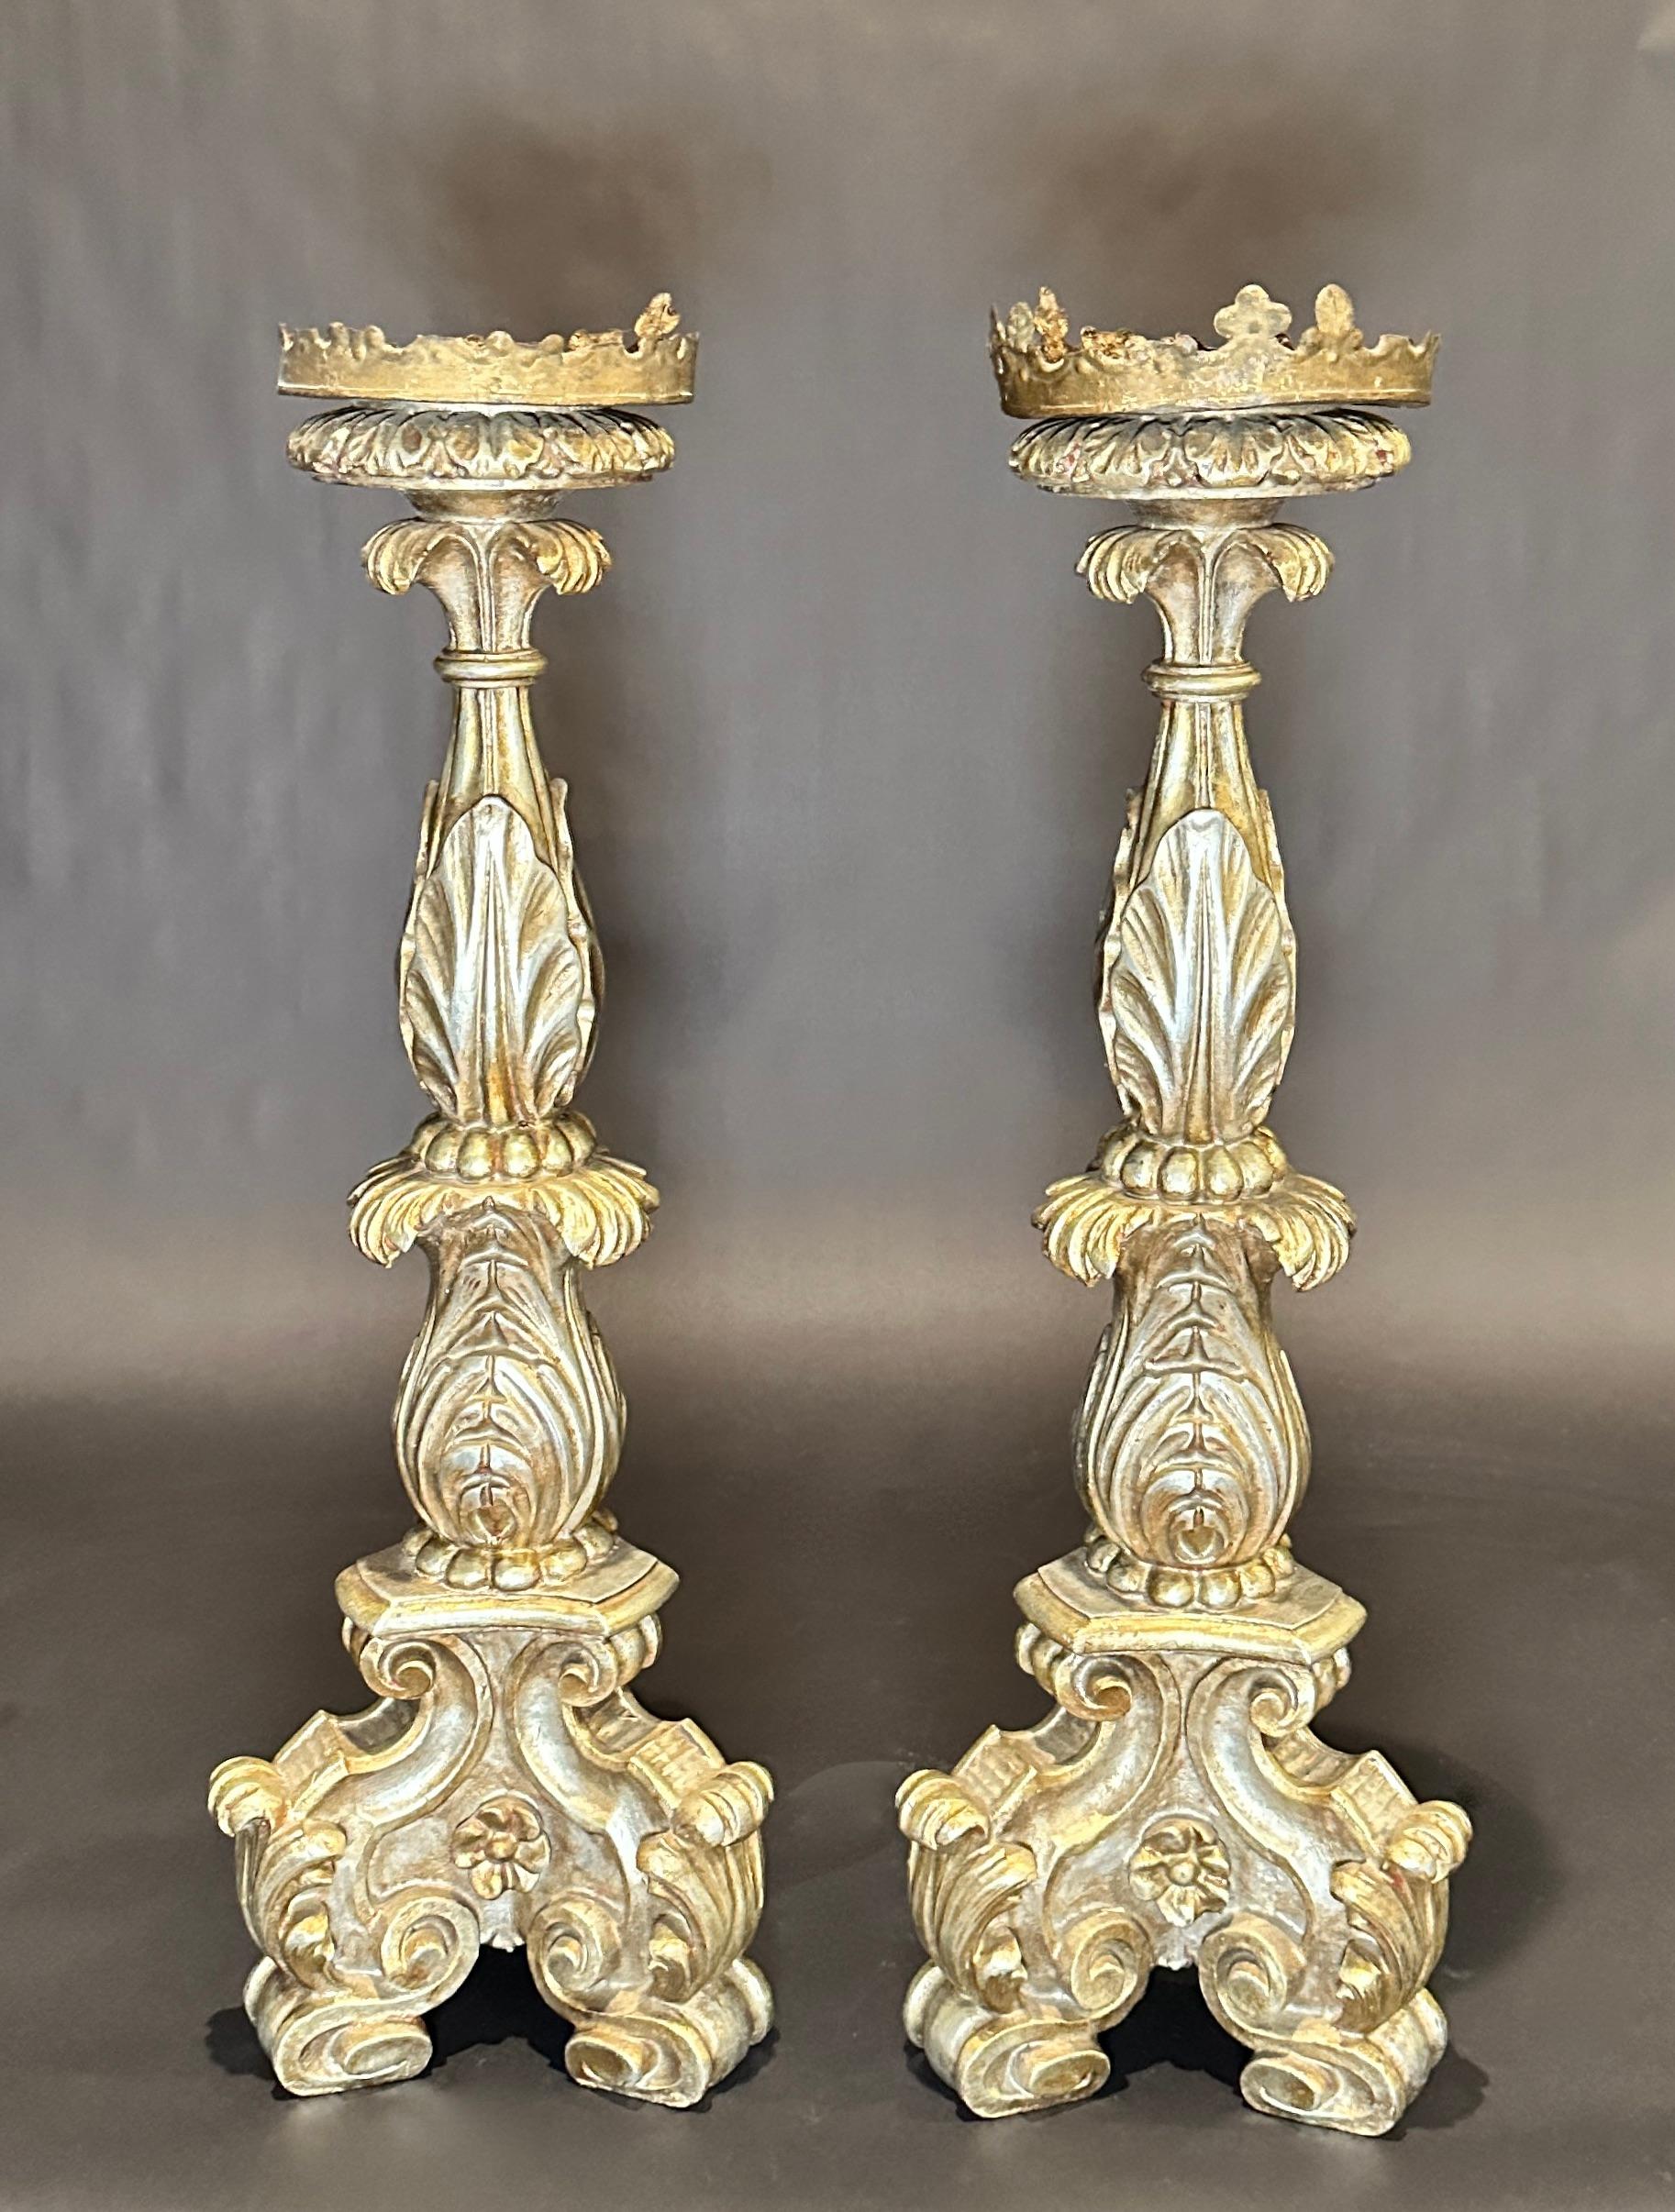 A stunning pair of hand carved silver giltwood antique Baroque 19th-Century Italian tripod form base pricket candlesticks. These gorgeous candlesticks are of nice large size, silver gilt and ornately carved. Silver gilt wood with bronze undertone